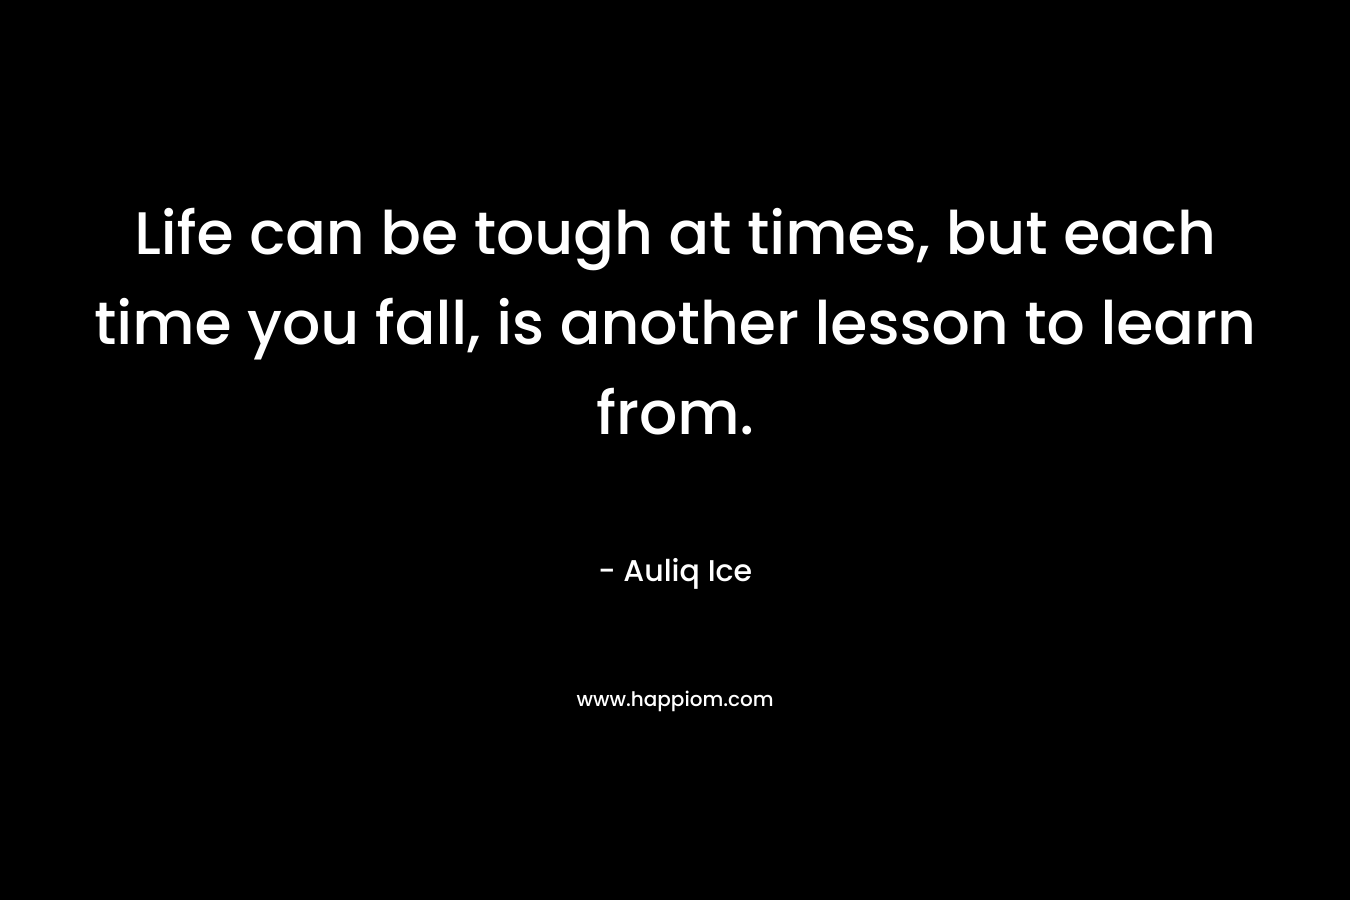 Life can be tough at times, but each time you fall, is another lesson to learn from.